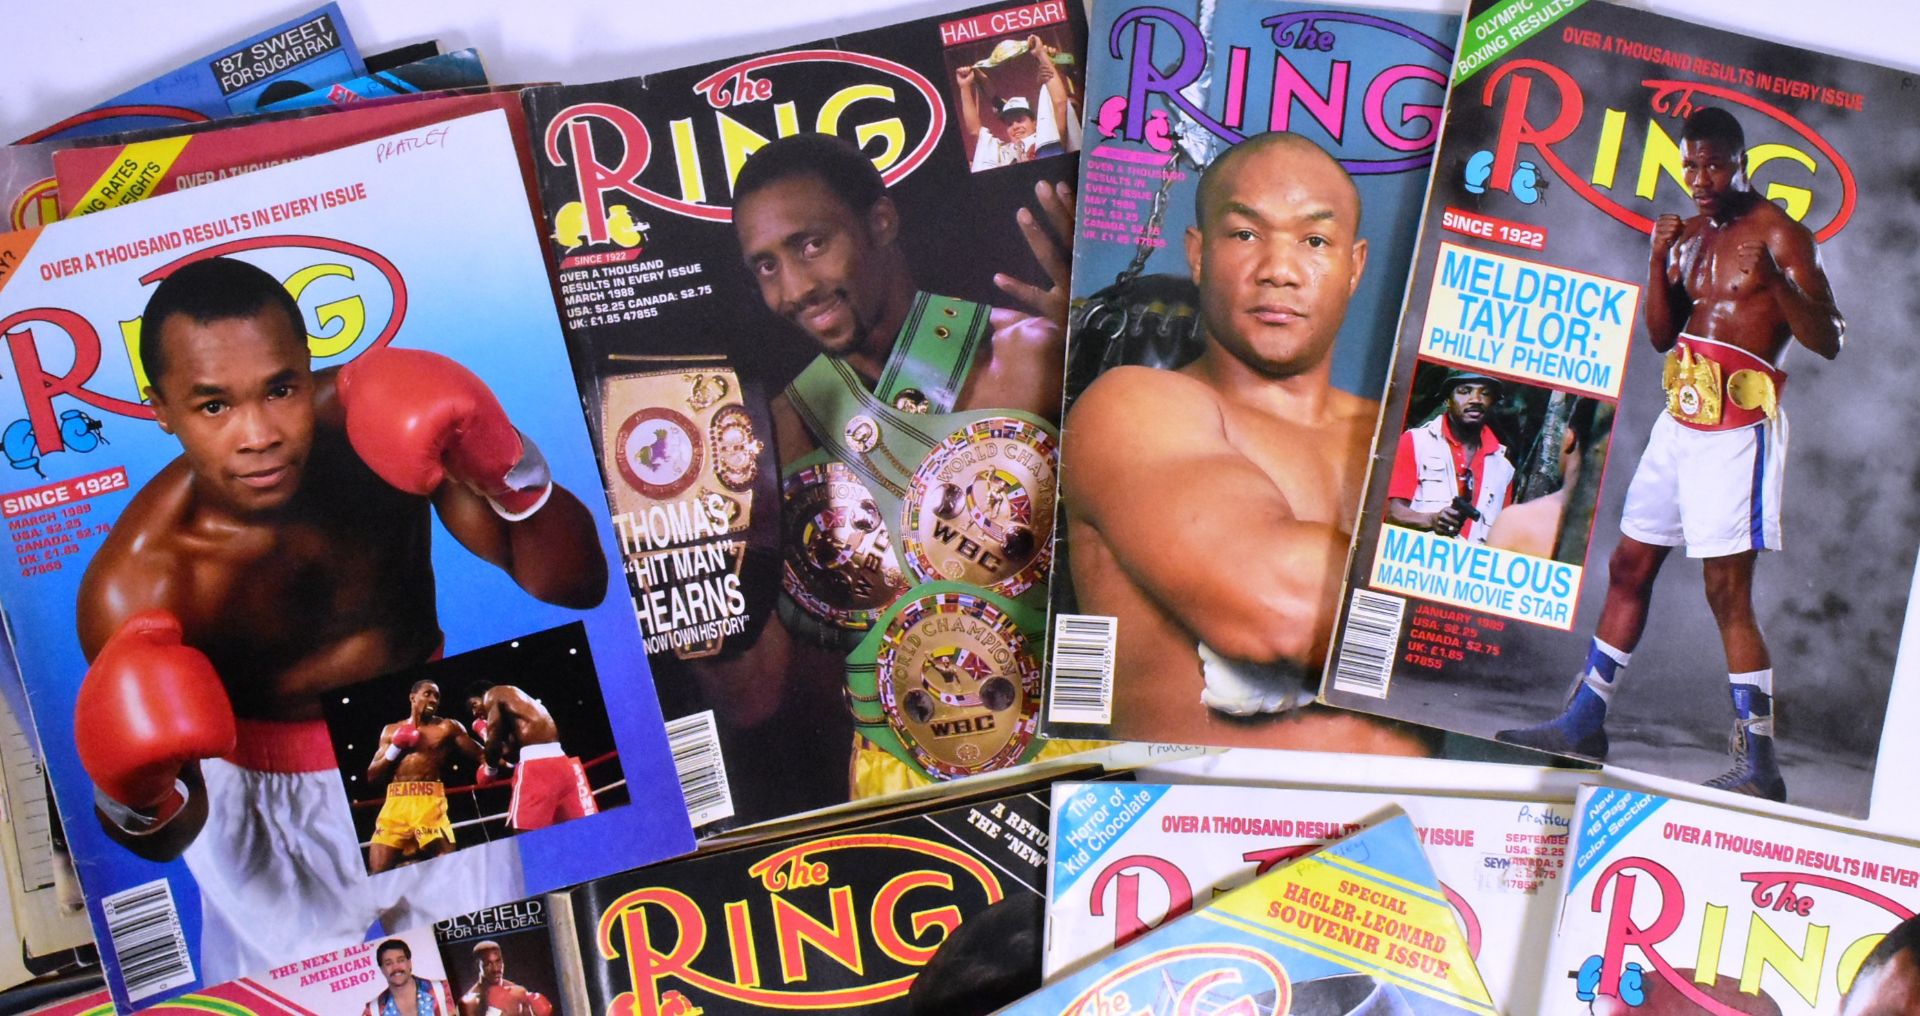 COLLECTION OF VINTAGE WRESTLING MAGAZINES - THE RING - Image 5 of 5